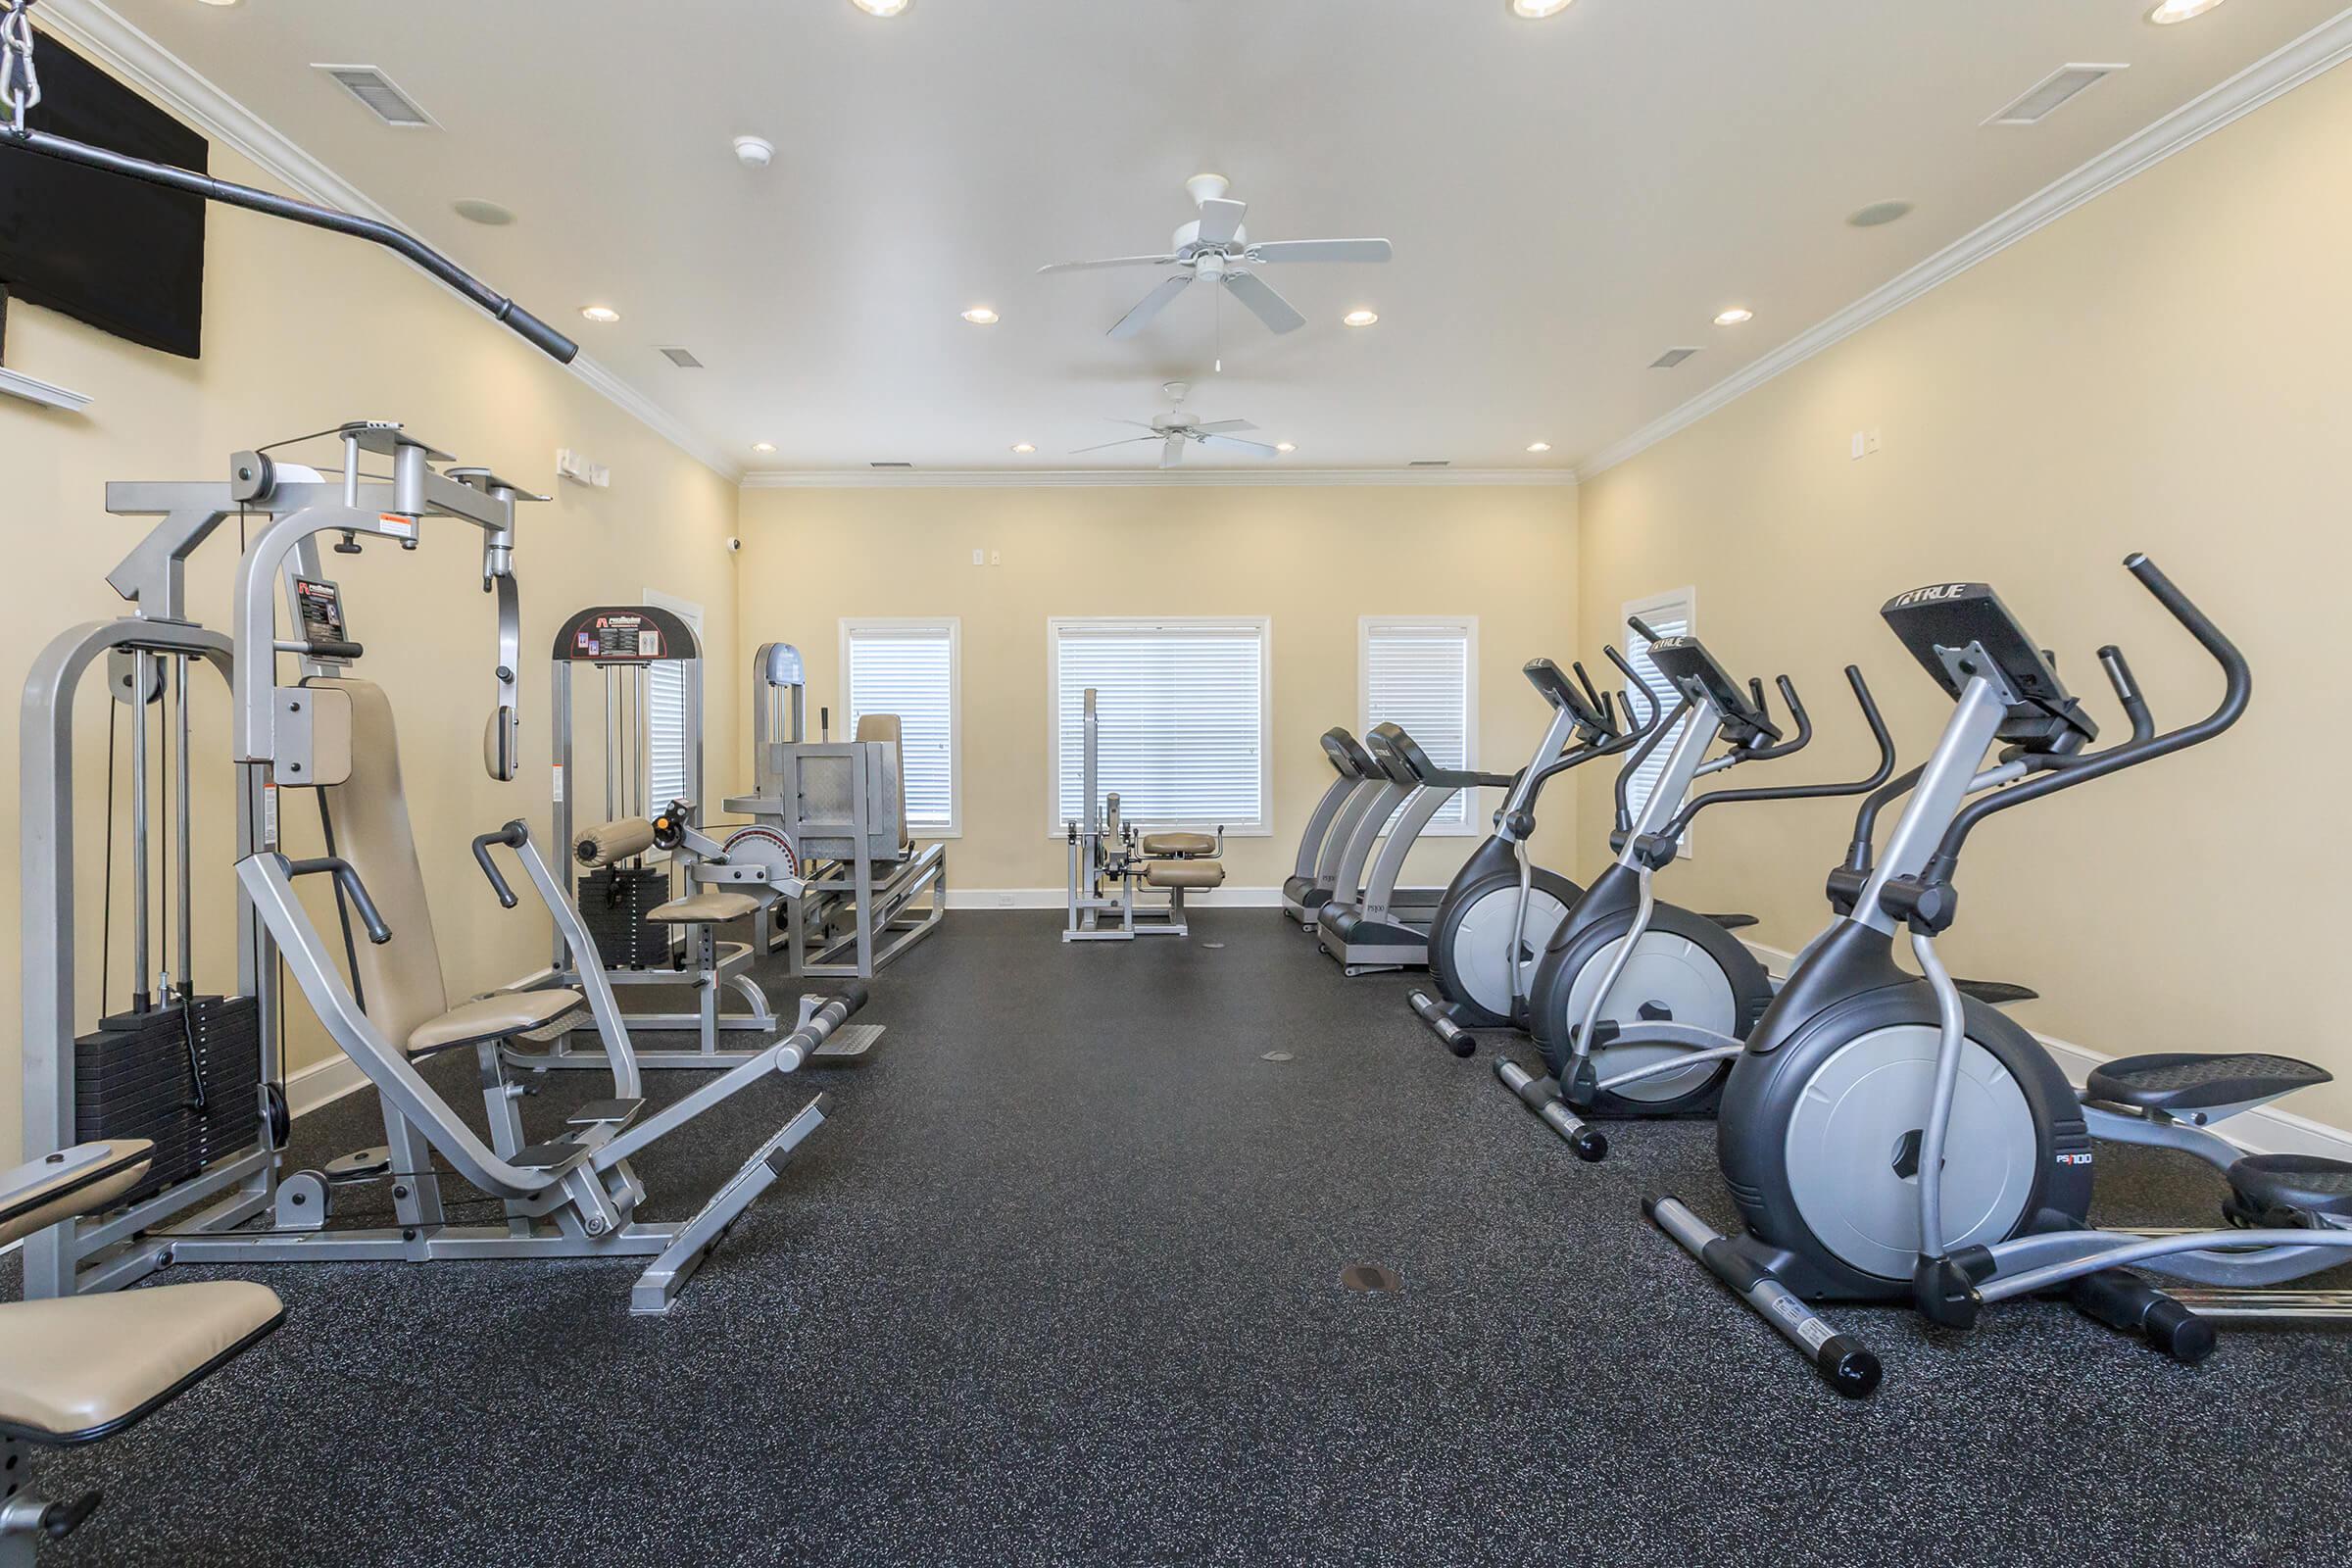 Enjoy Our Fitness Center Here At Cooper's Ridge in Ladson, South Carolina